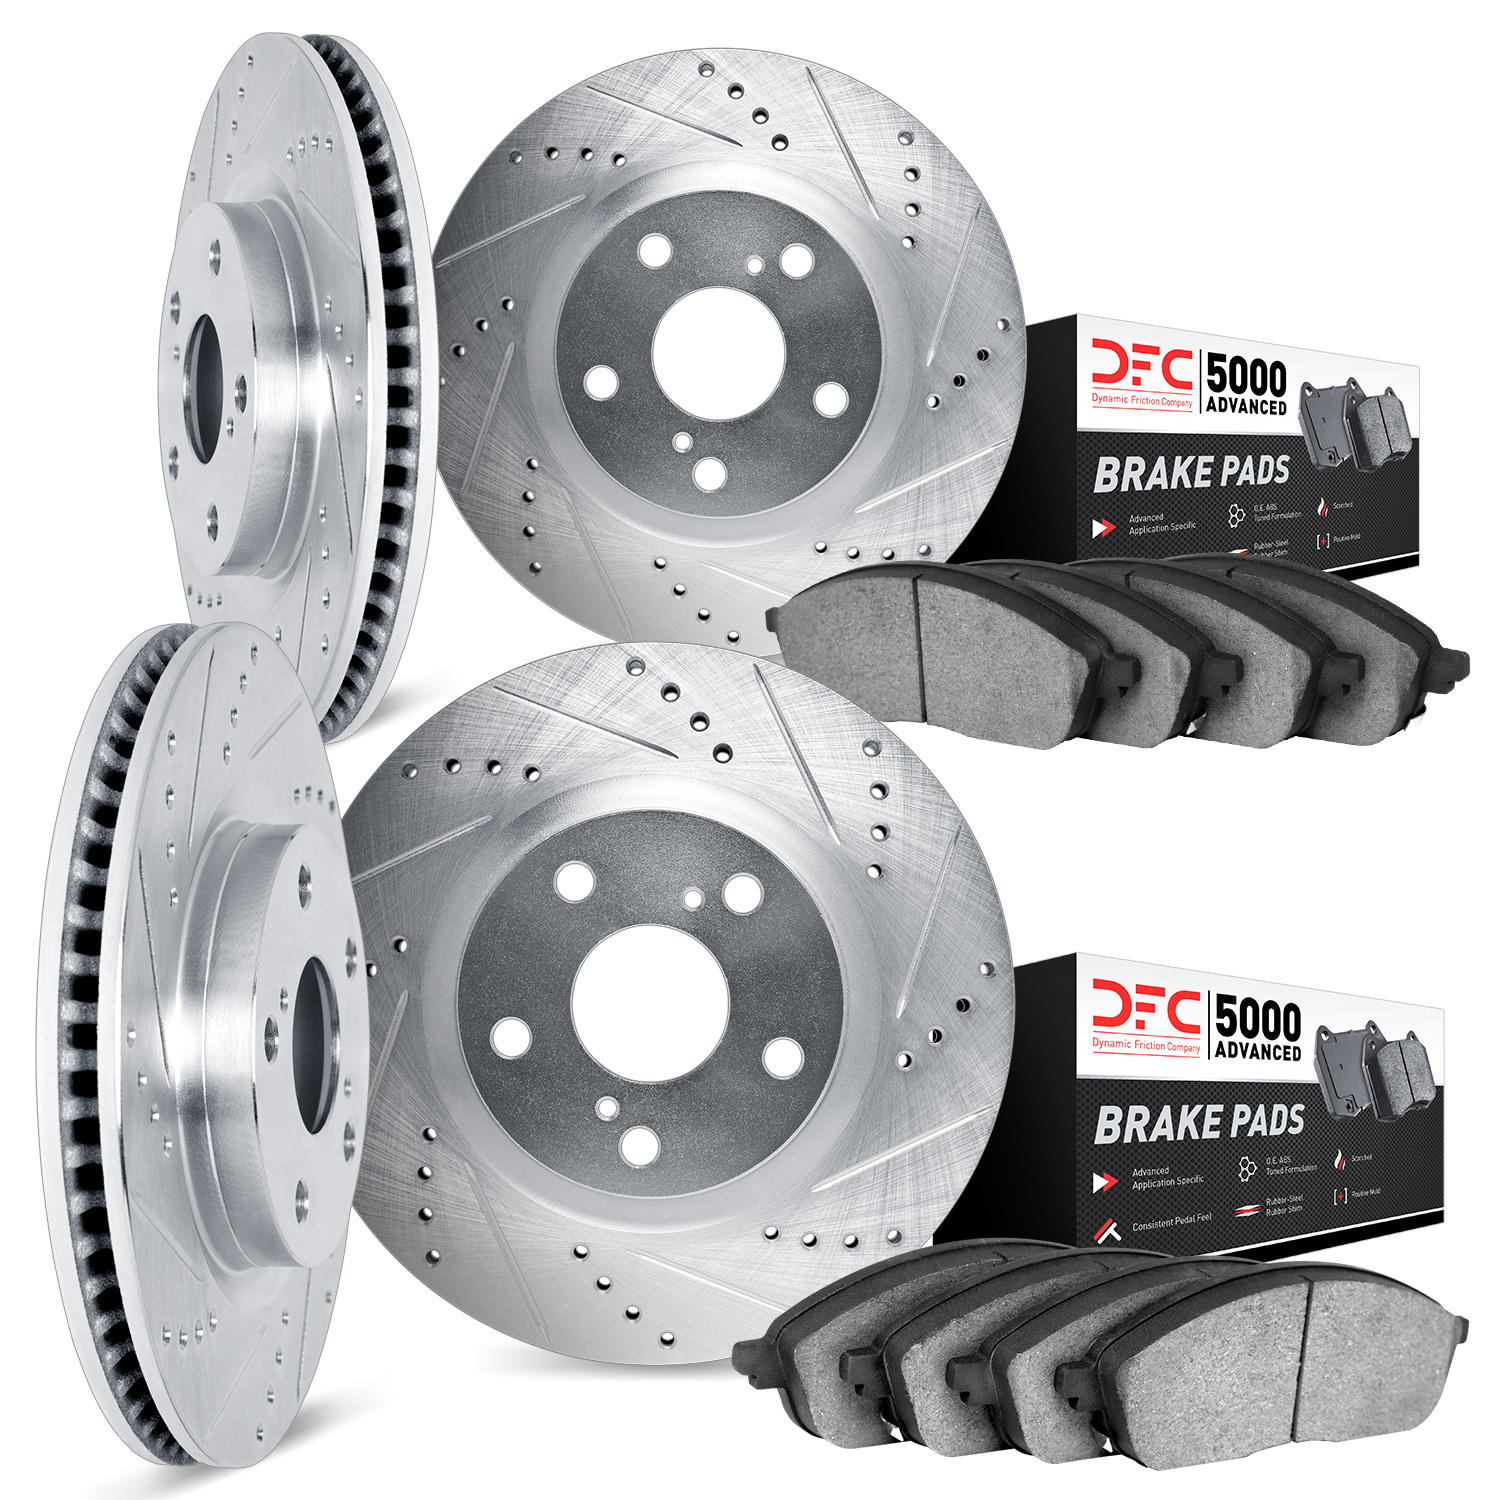 7504-11008 Drilled/Slotted Brake Rotors w/5000 Advanced Brake Pads Kit [Silver], 2005-2009 Land Rover, Position: Front and Rear